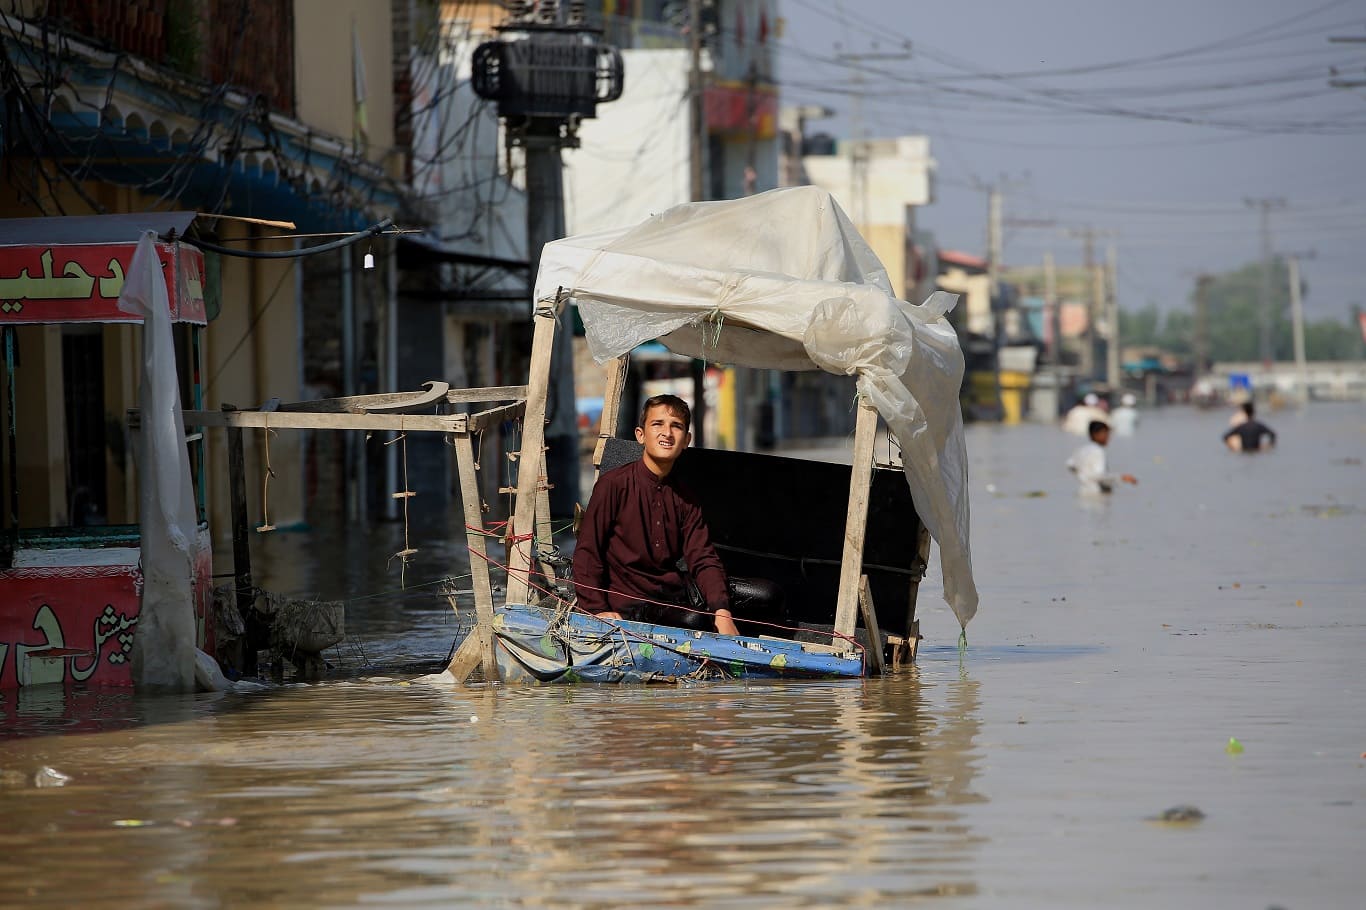 A boy sits on a street stall in a flooded area following heavy rains in Khyber Pakhtunkhwa, Pakistan Photo by Bilawal Arbab/EPA-EFE